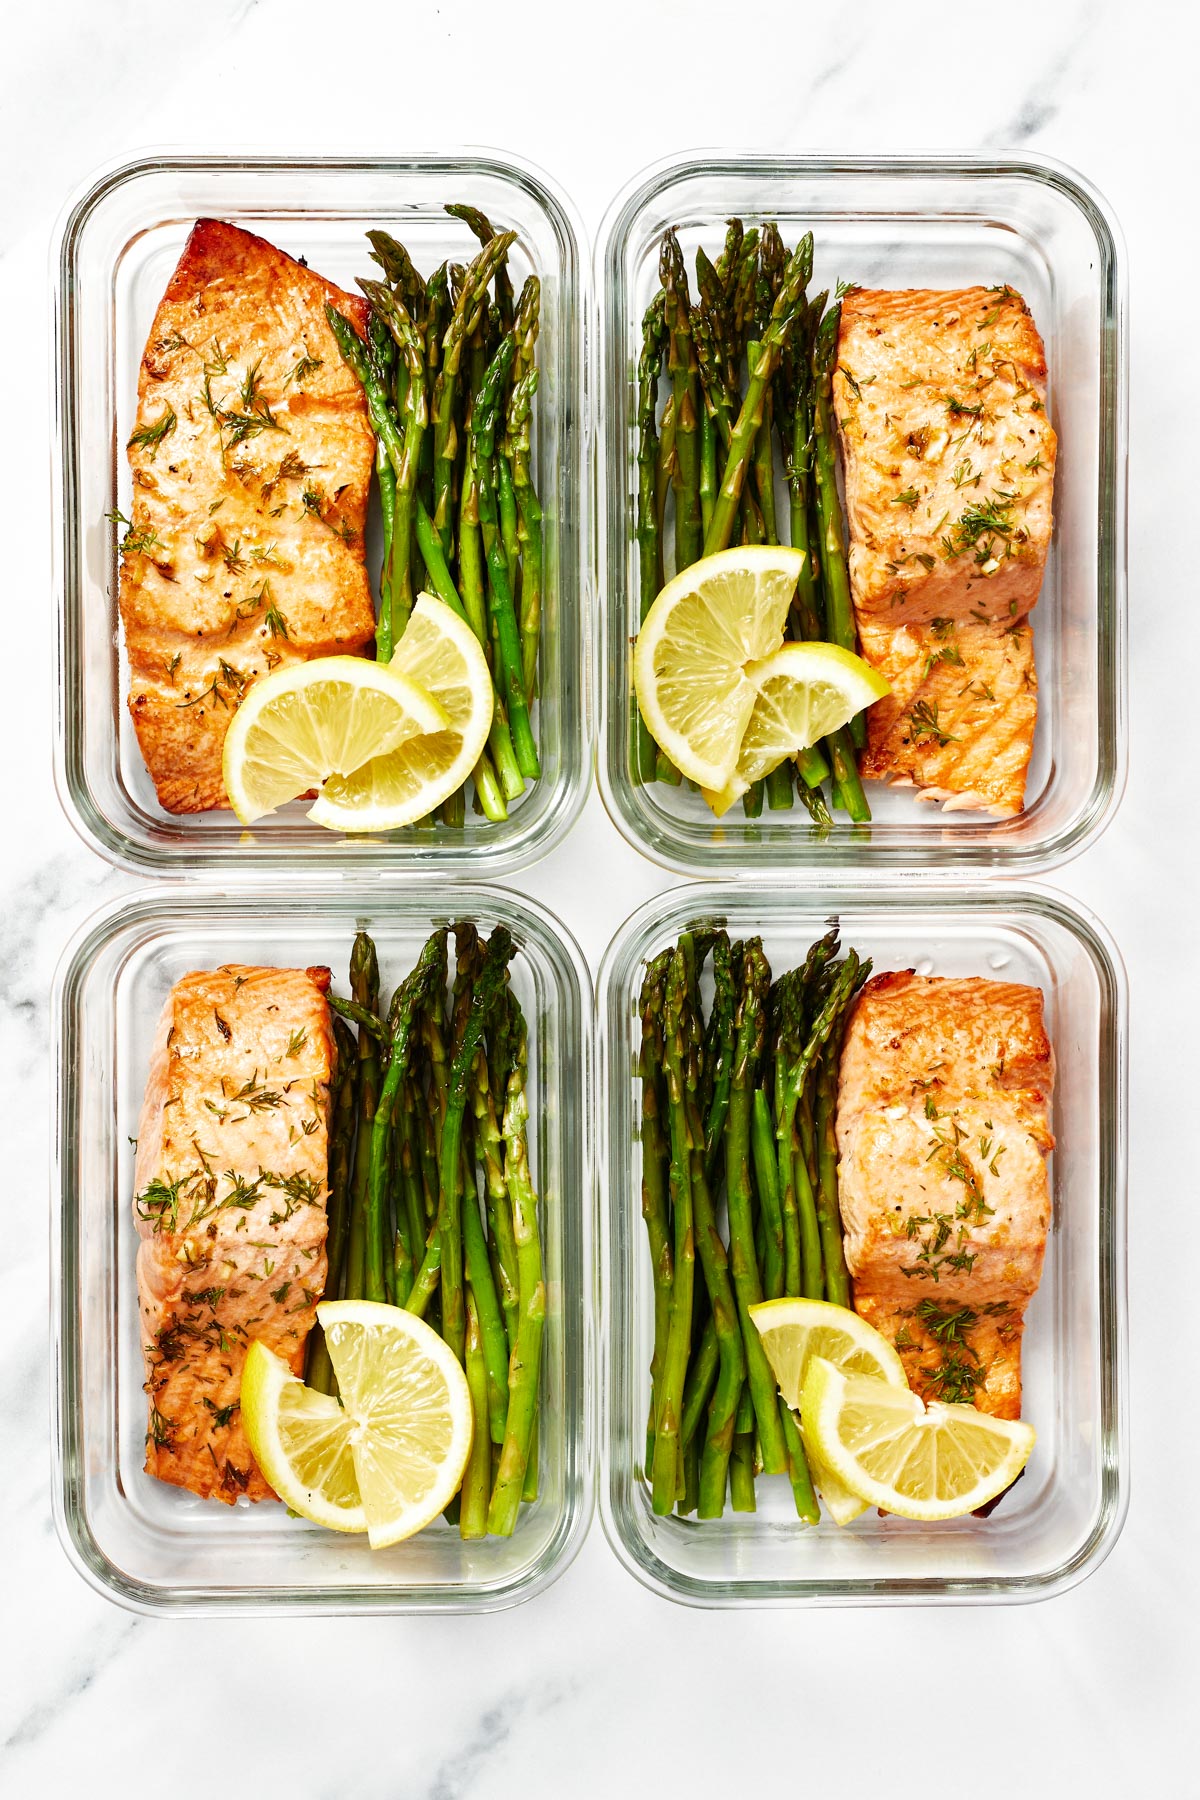 Four meal prep containers, each with a filet of air fryer salmon, asparagus and two lemon slices.